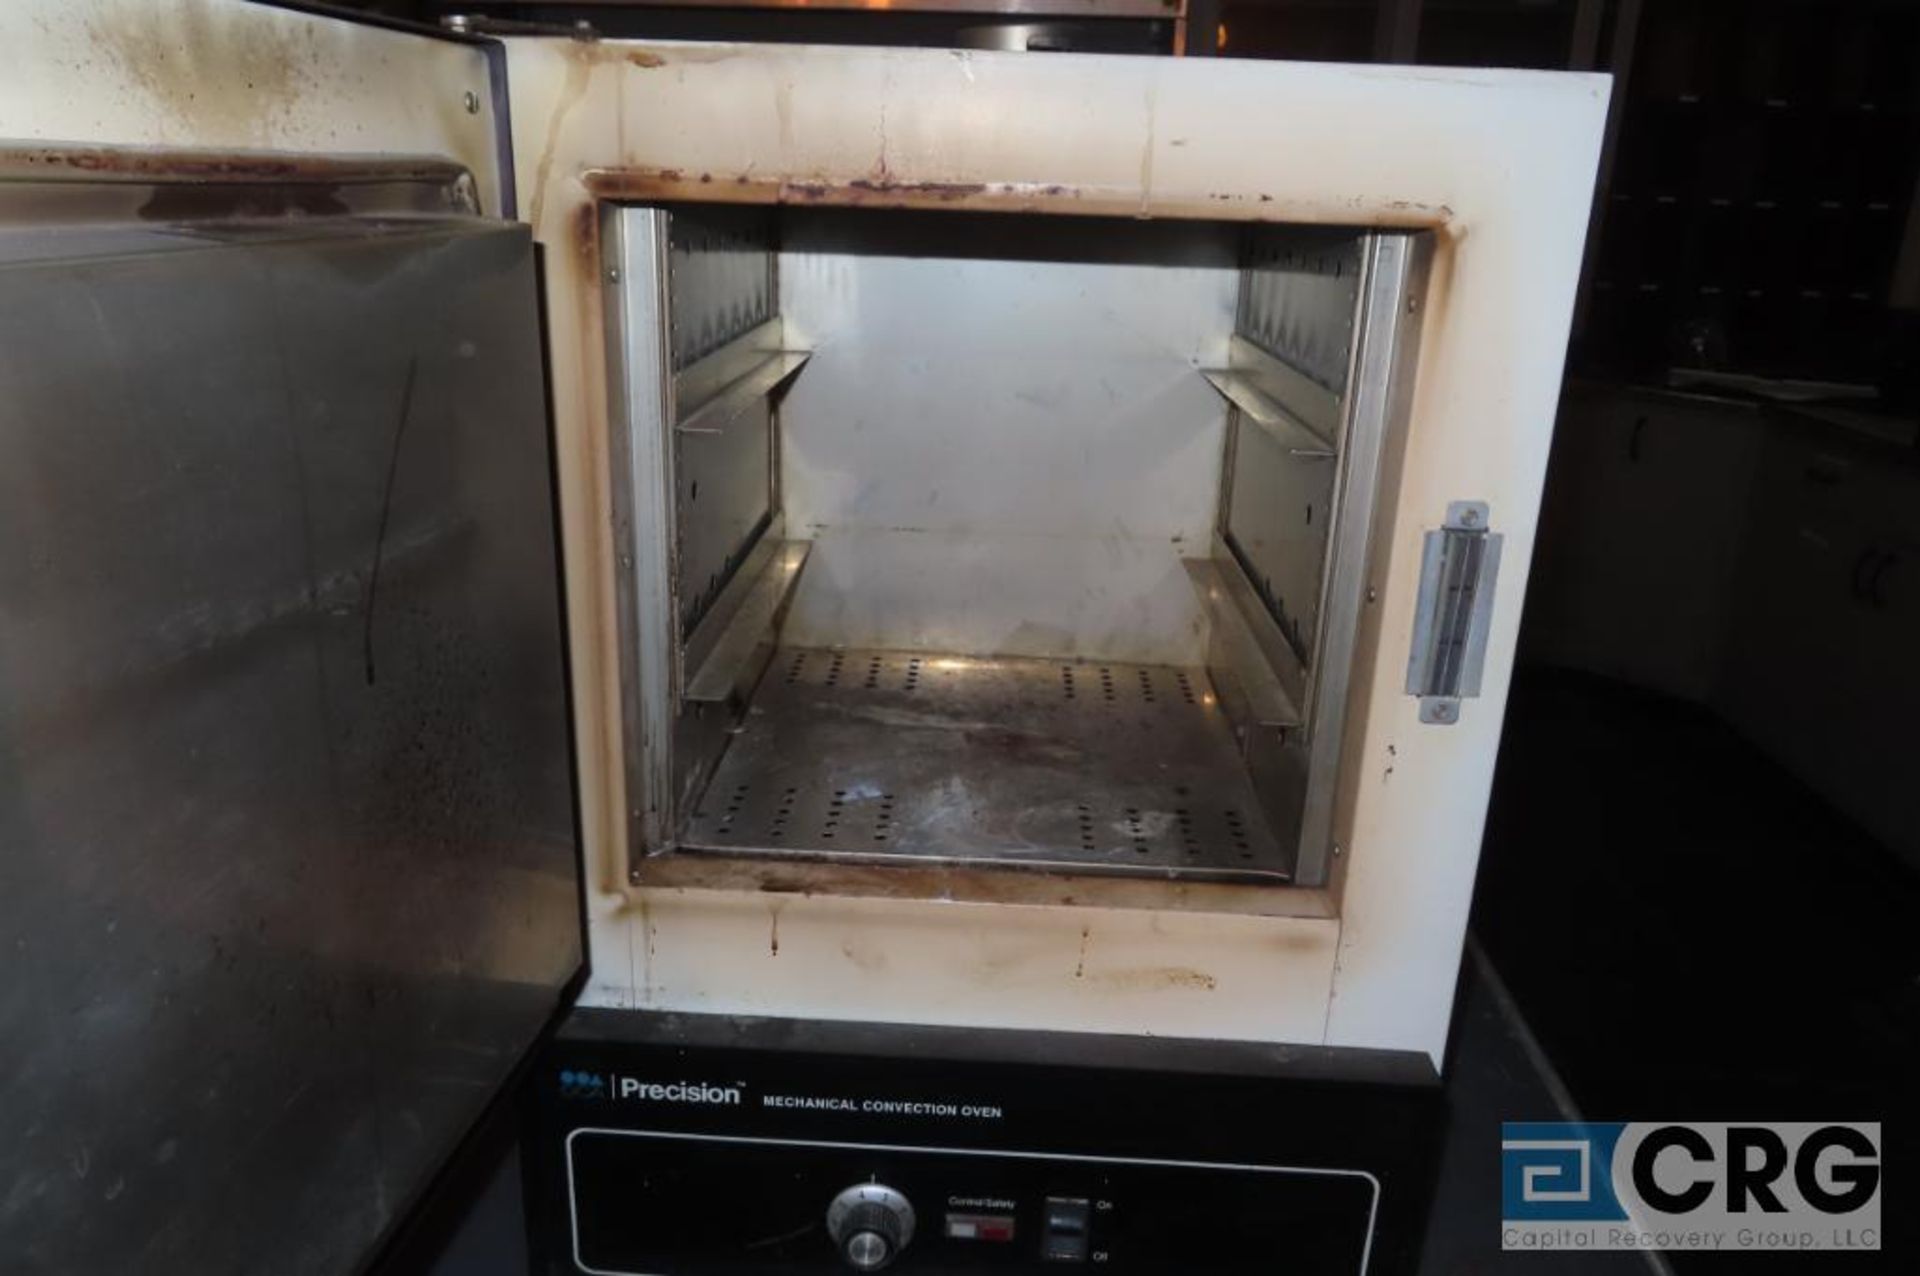 Convection oven - Image 2 of 2